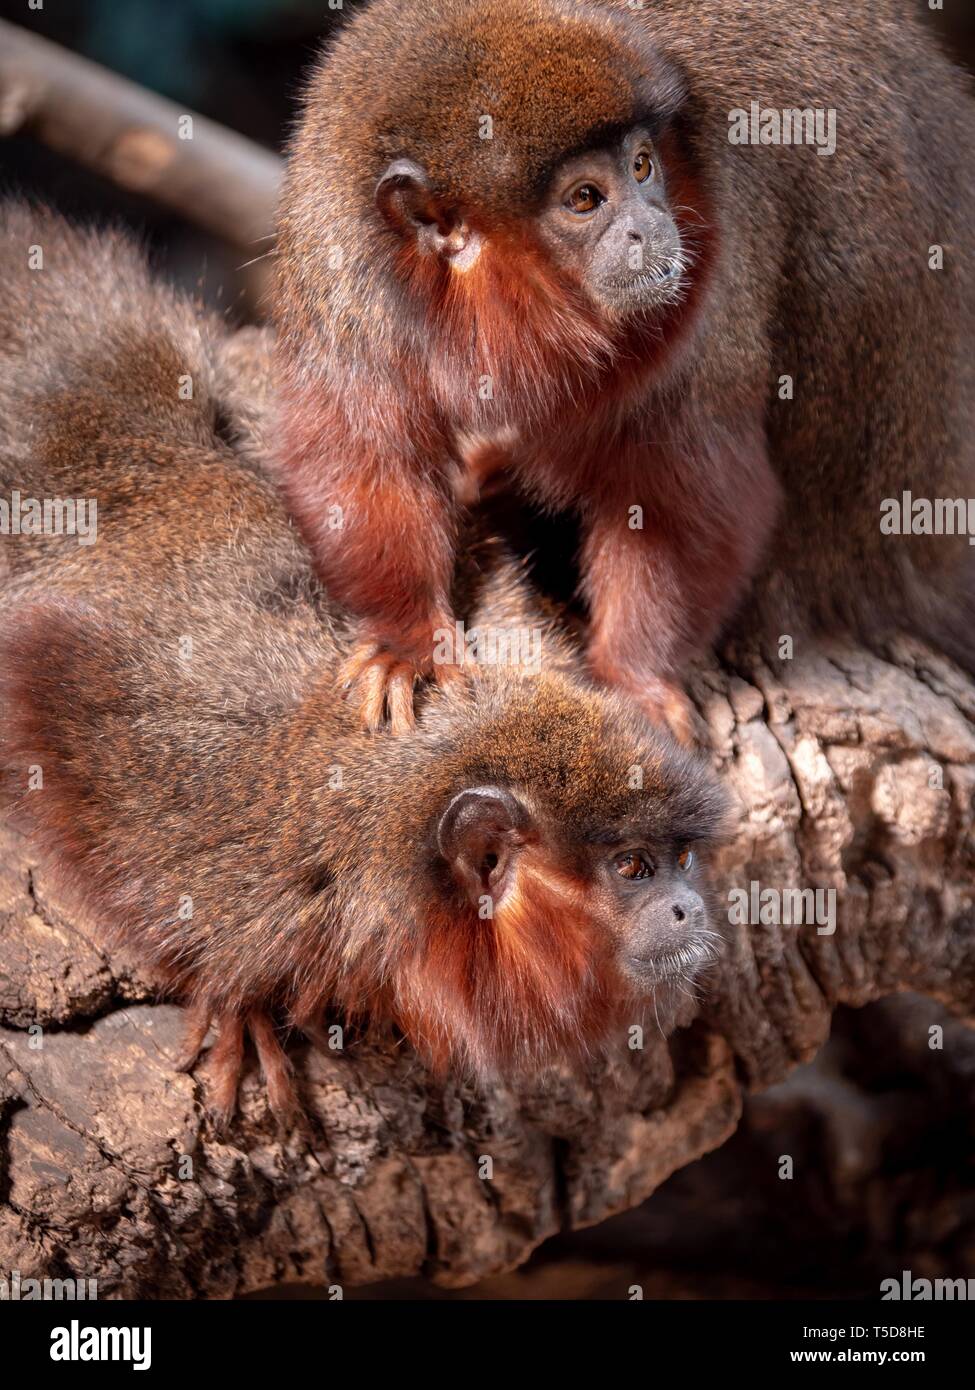 A red titi monkey grooming another while looking off to the side Stock Photo